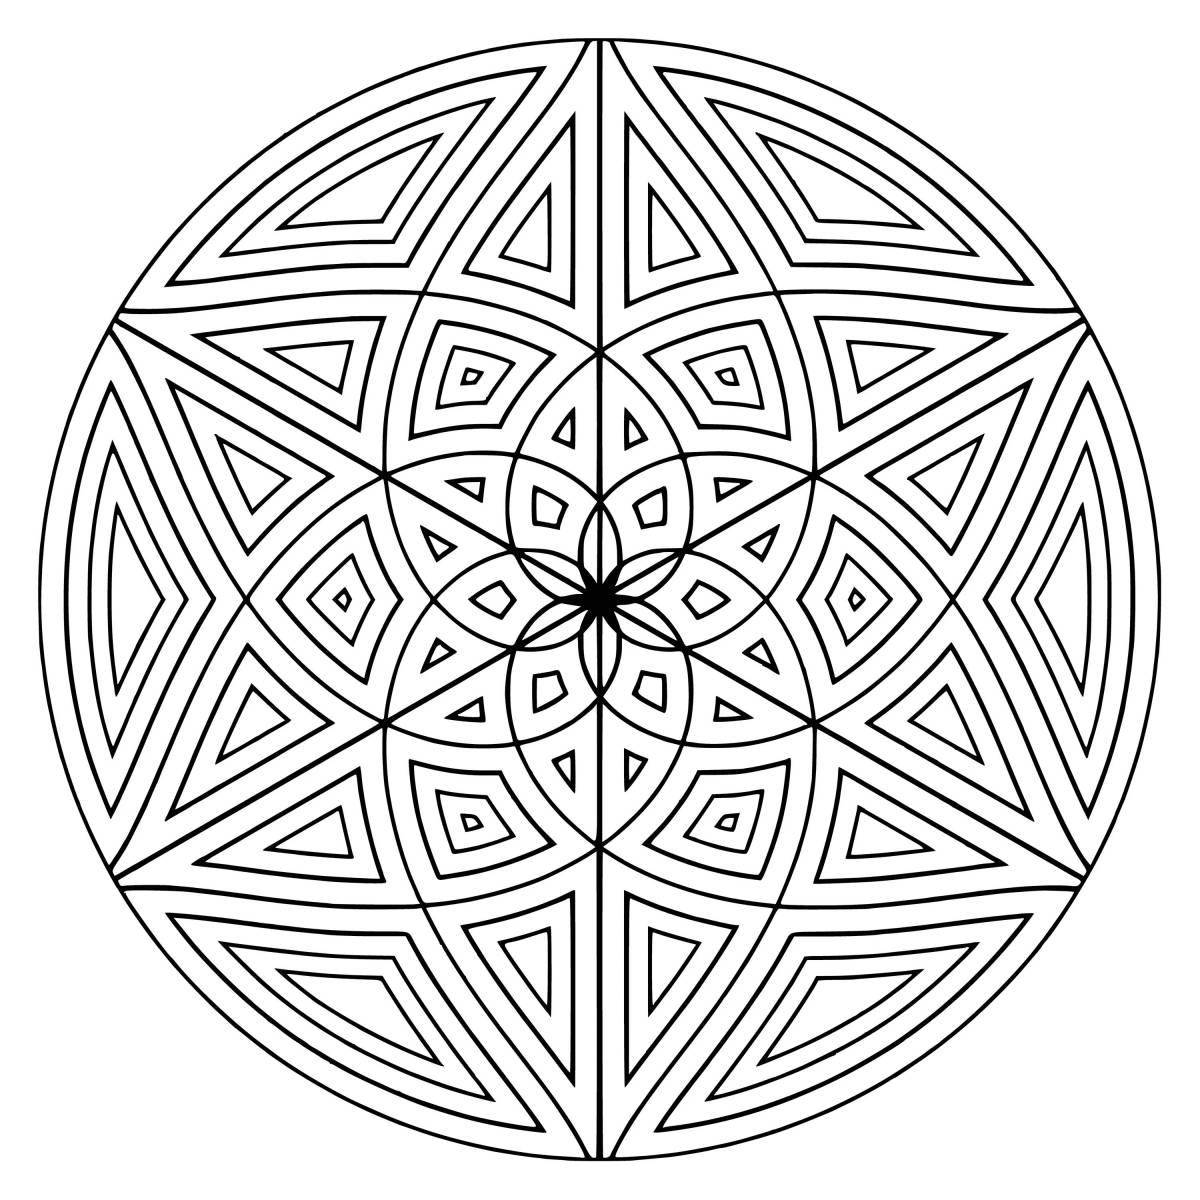 Coloring page with colorful geometry